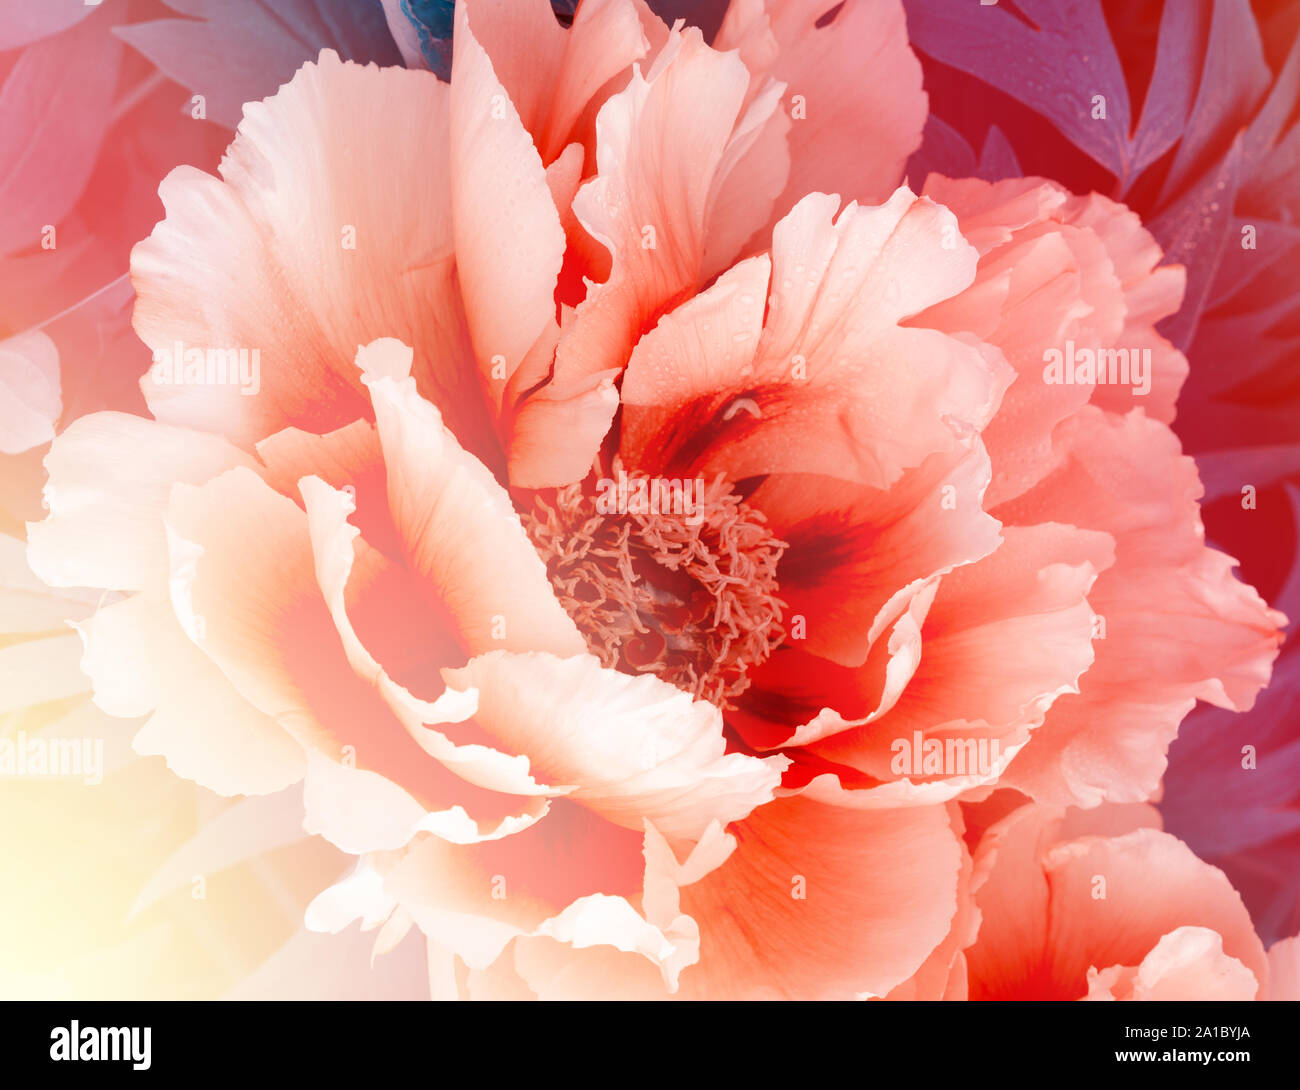 Bright Floral Wallpaper With Beautiful Gentle Pink Peony Flower